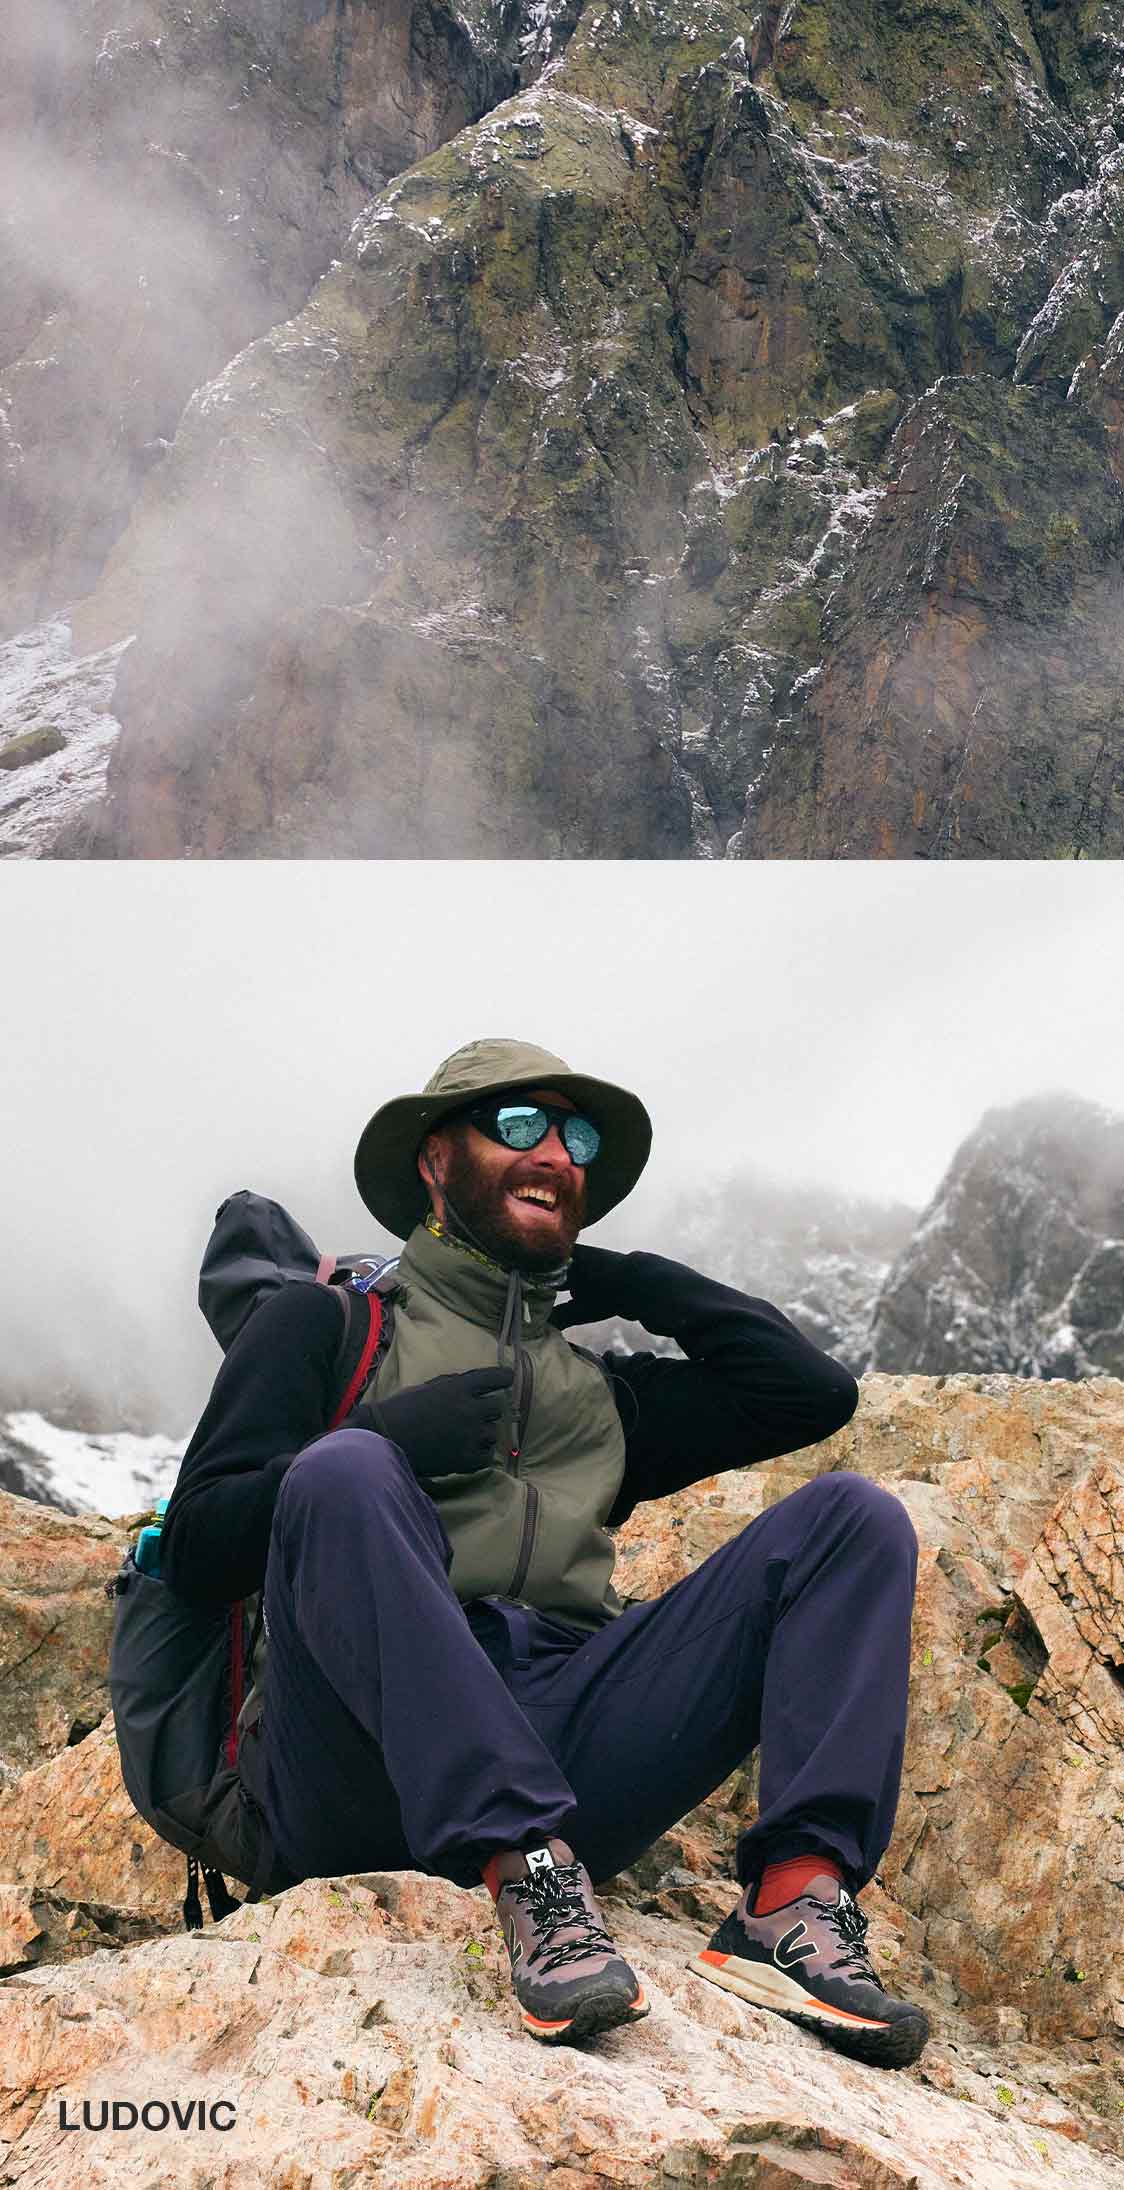 Member of the VEJA team, smiling with FITZ ROY hiking shoes on his feet.